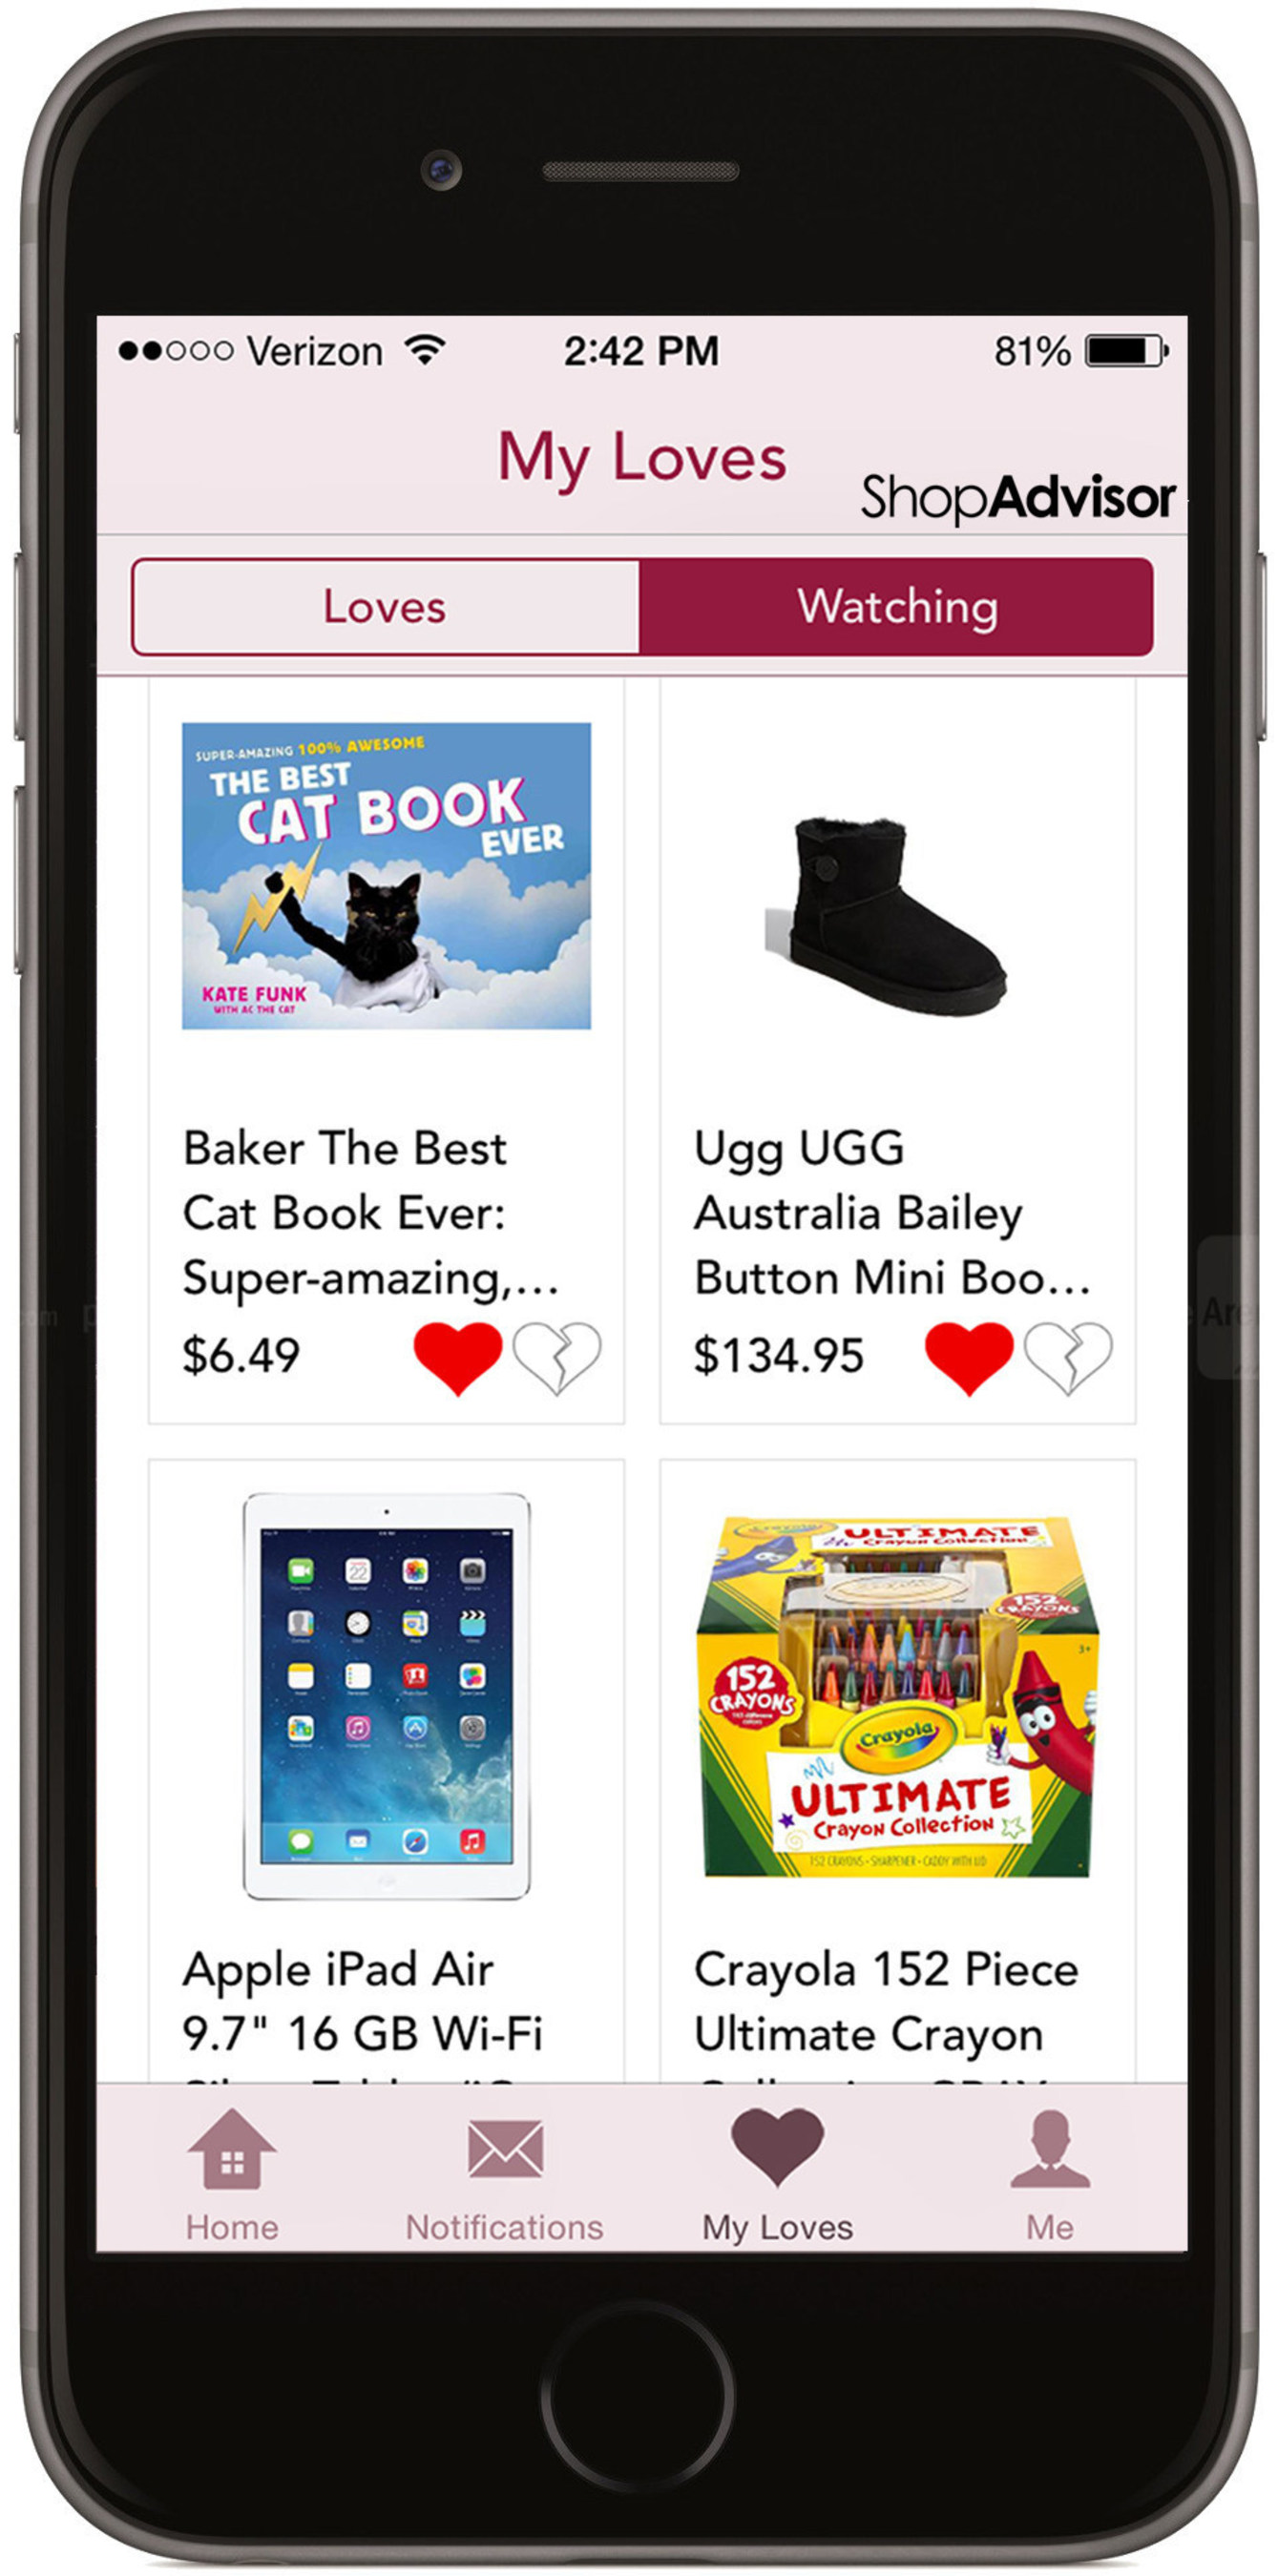 CAT BOOKS AND UGG BOOTS JOIN iPADS AMONG MOST WANTED HOLIDAY GIFTS ON SHOPADVISOR SHOPPING APP